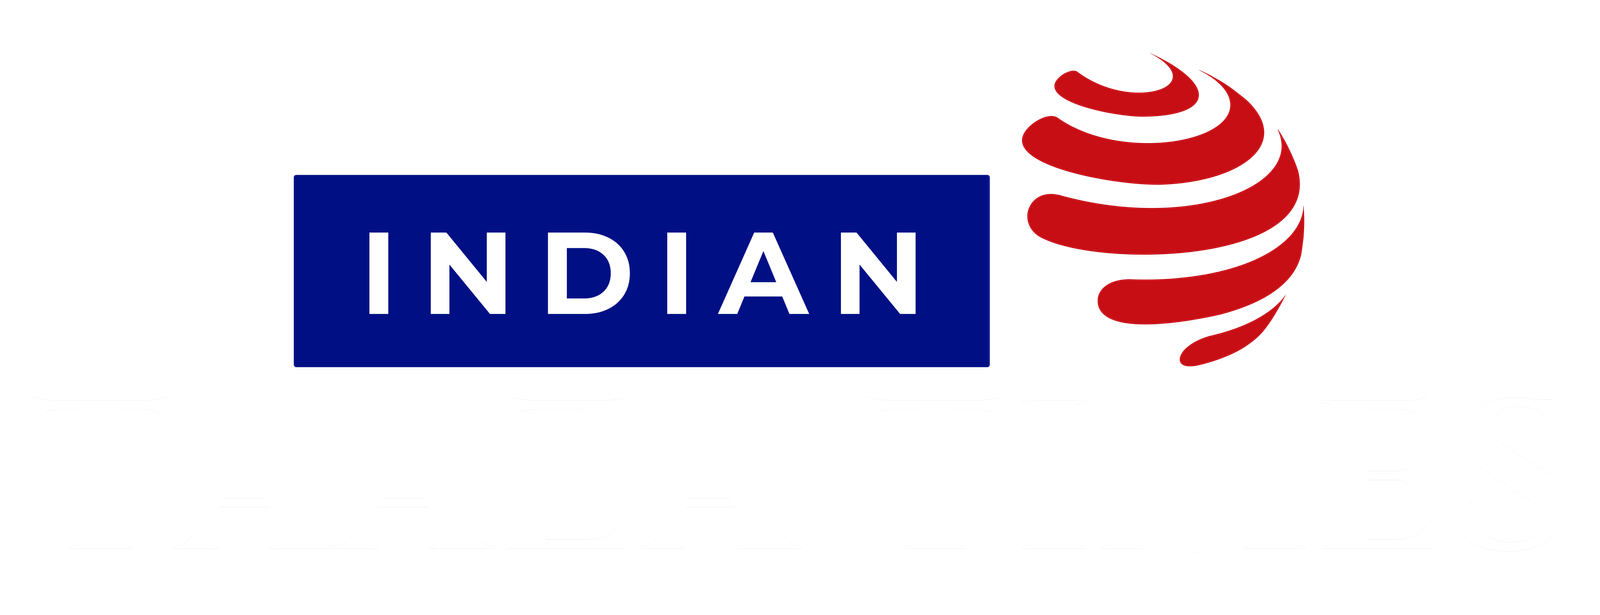 Indian Taaza Times